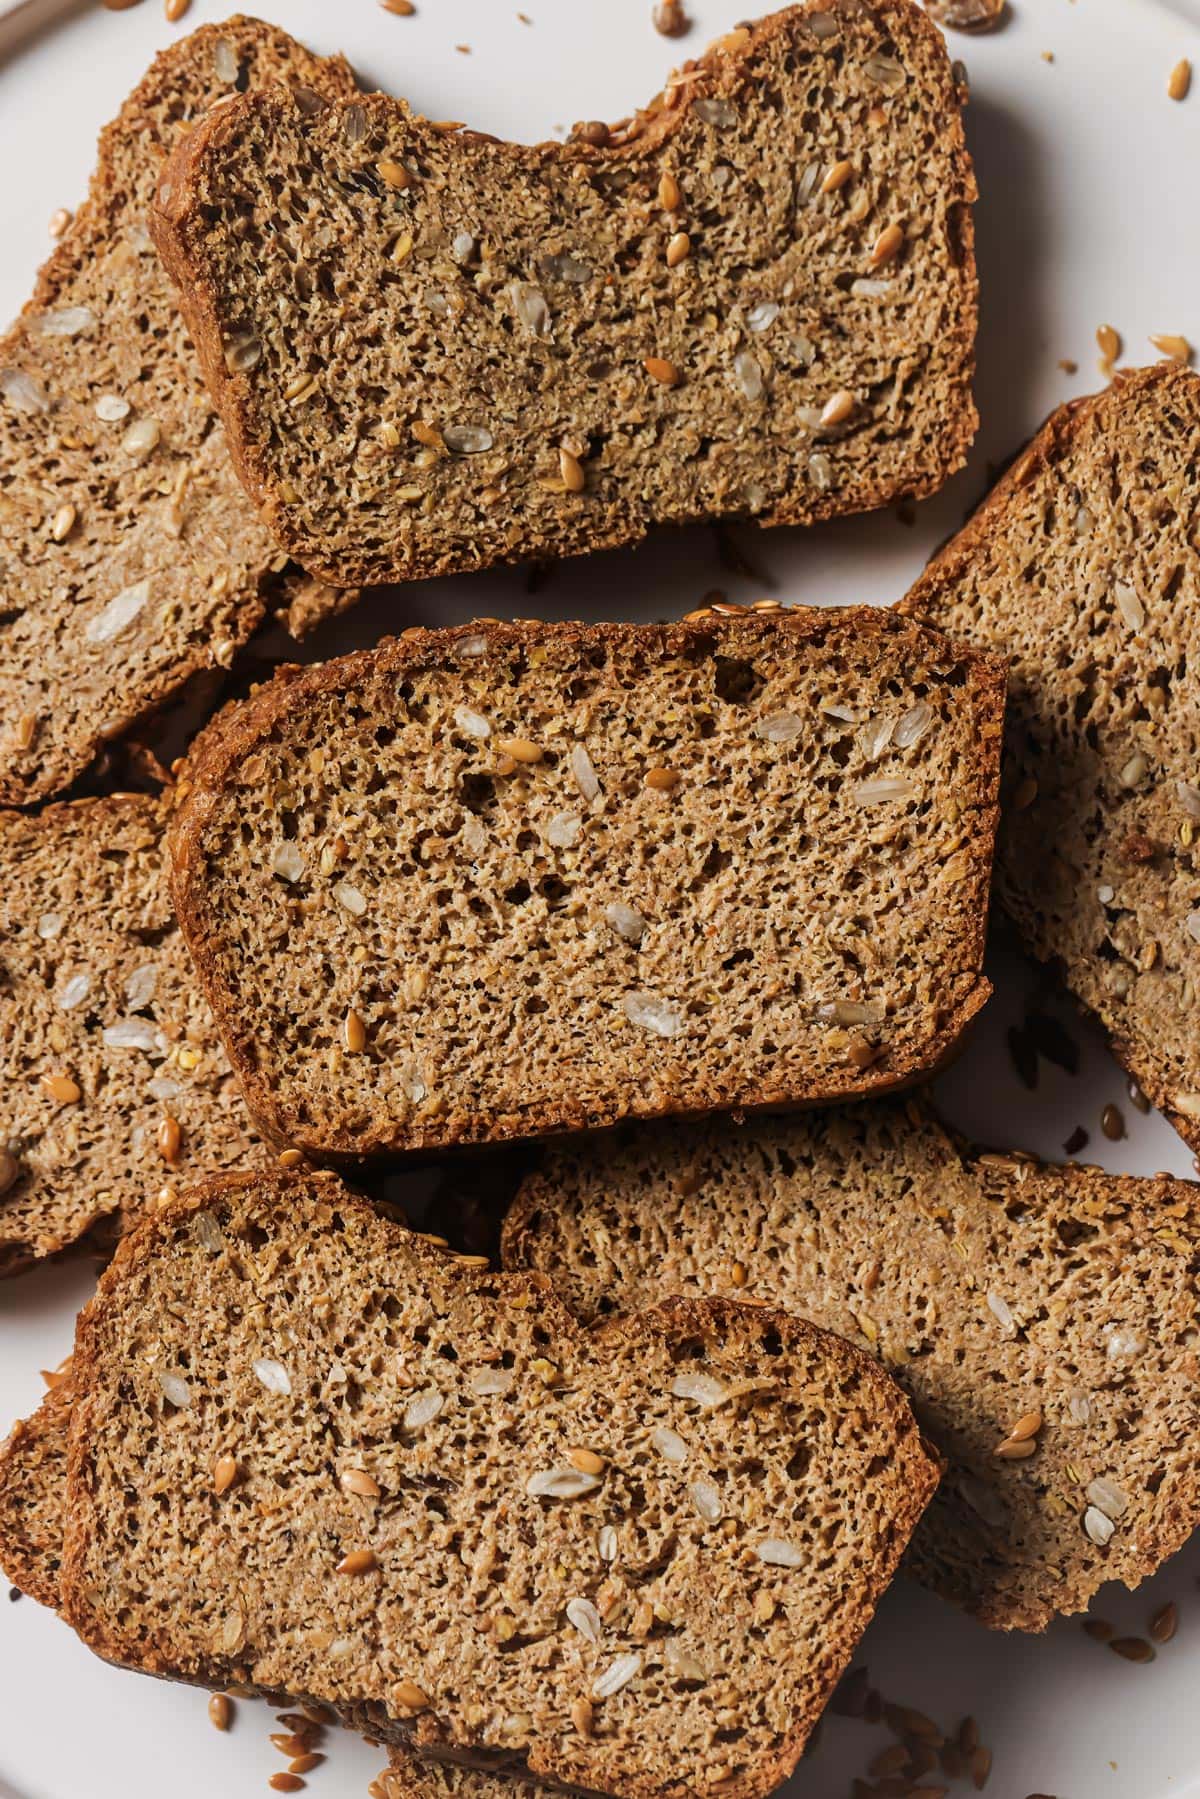 Slices of flaxseed bread on a plate.